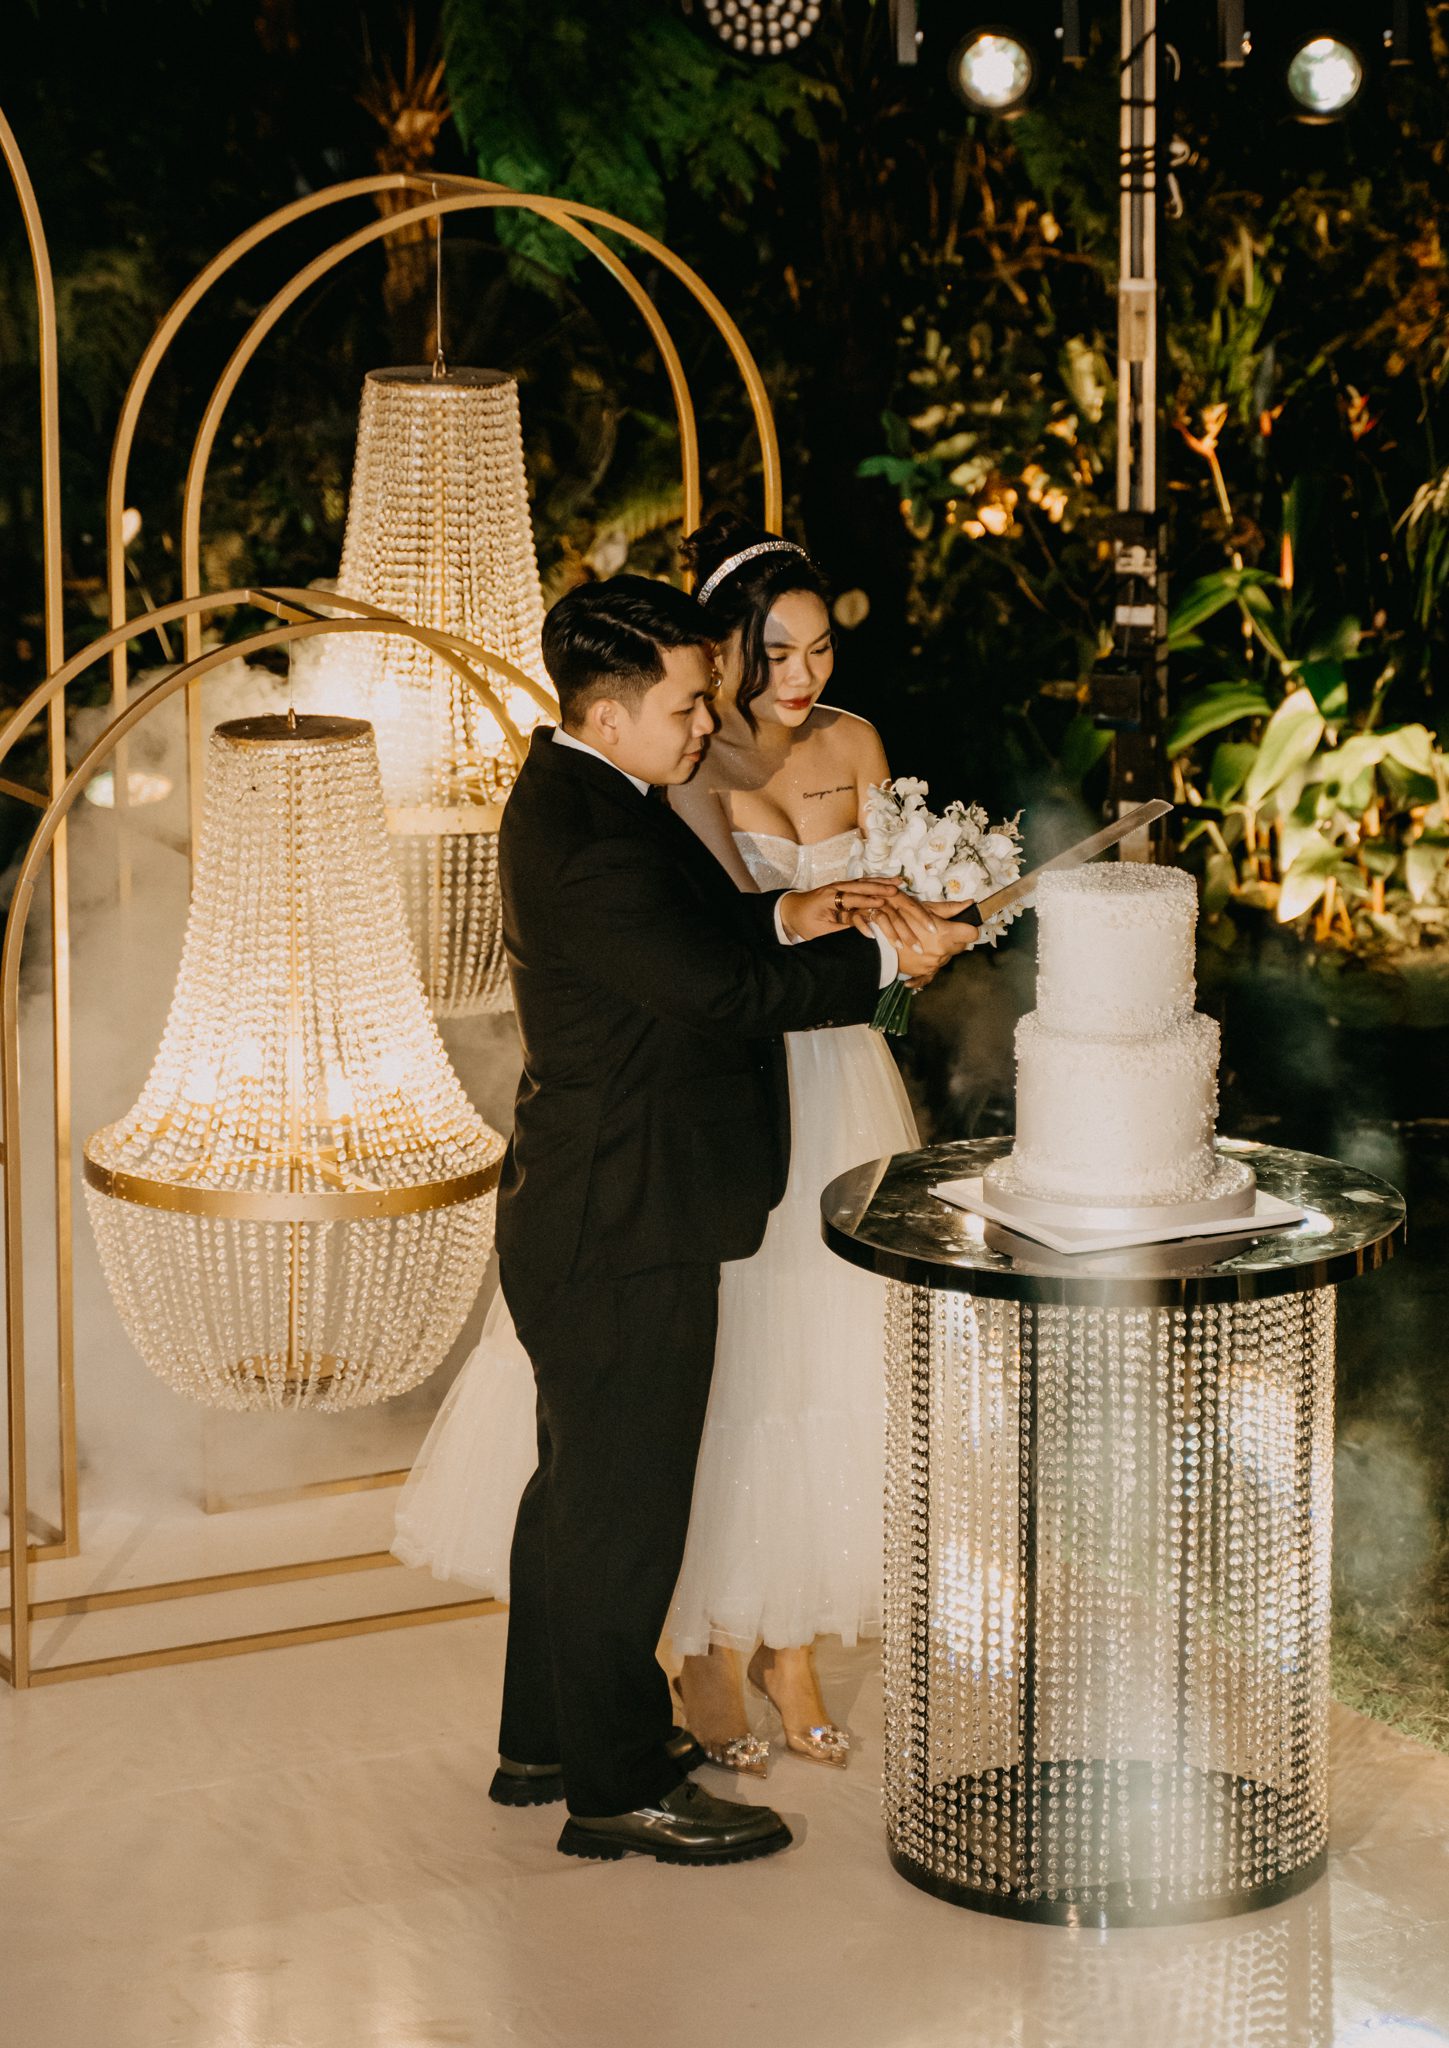 Saigon intimate wedding at An Lam Retreat 01539 - The Planners